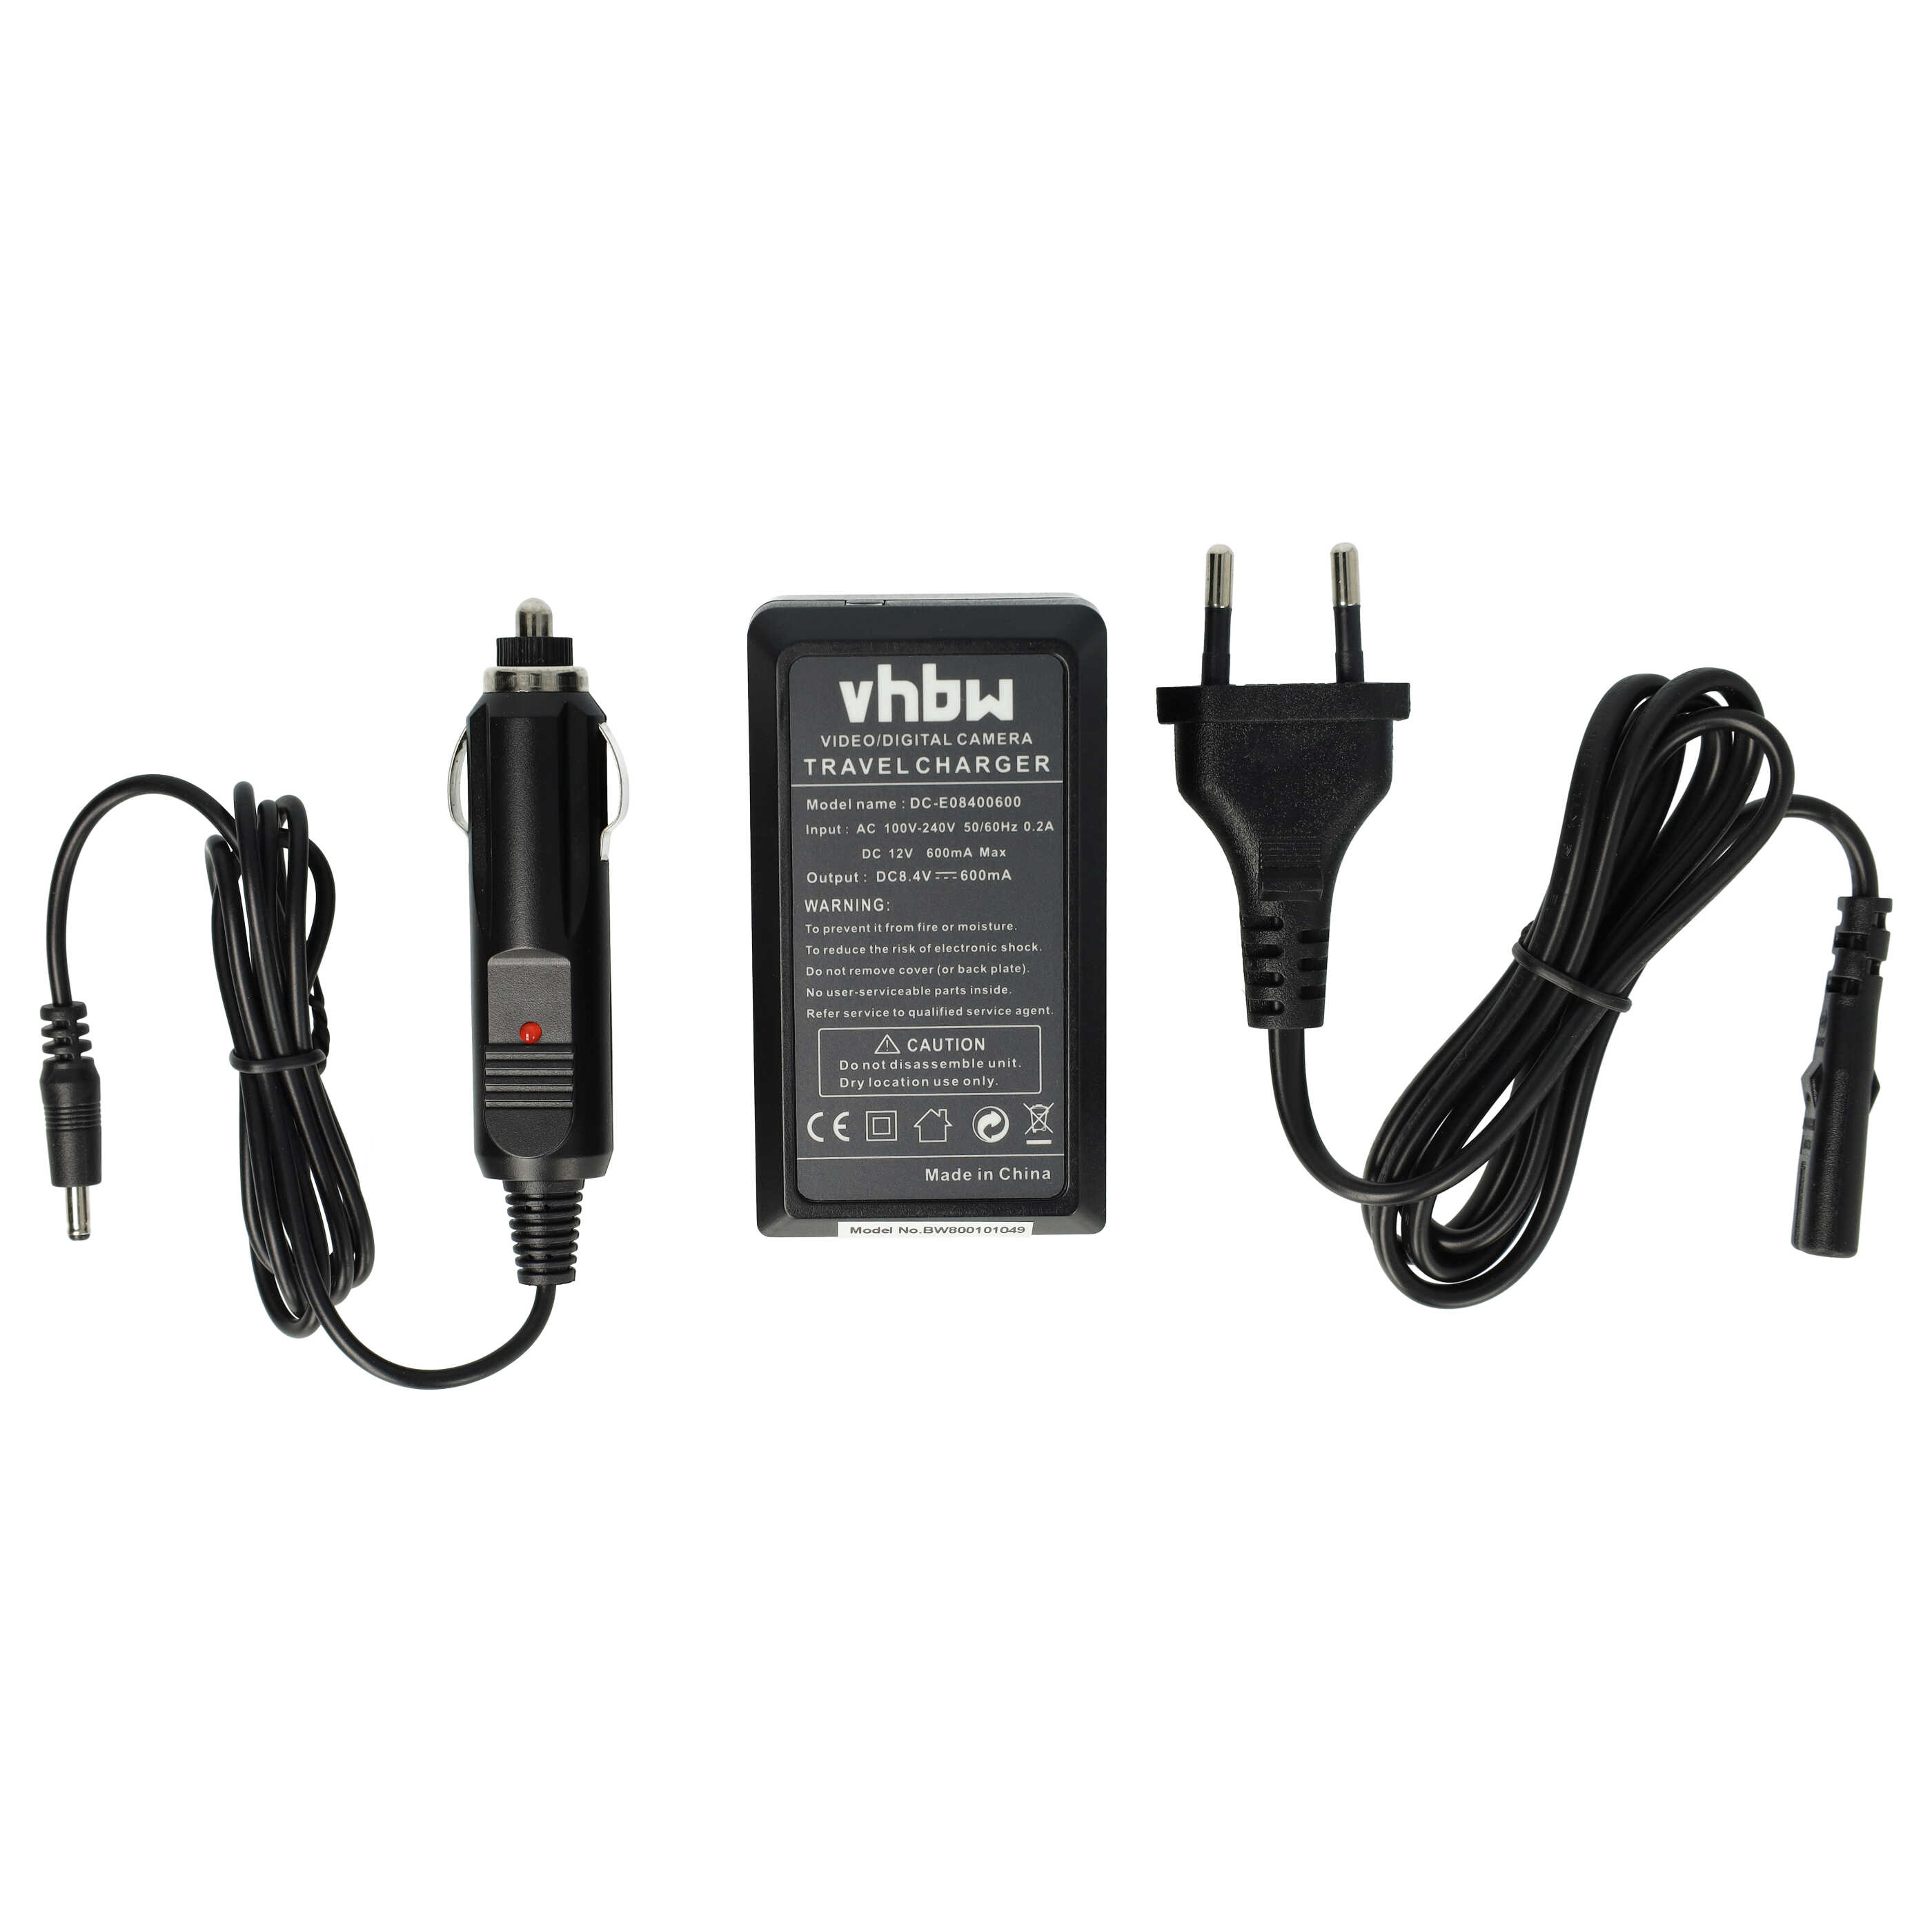 Battery Charger suitable for Lumix DMC-GF1 Camera etc. - 0.6 A, 8.4 V